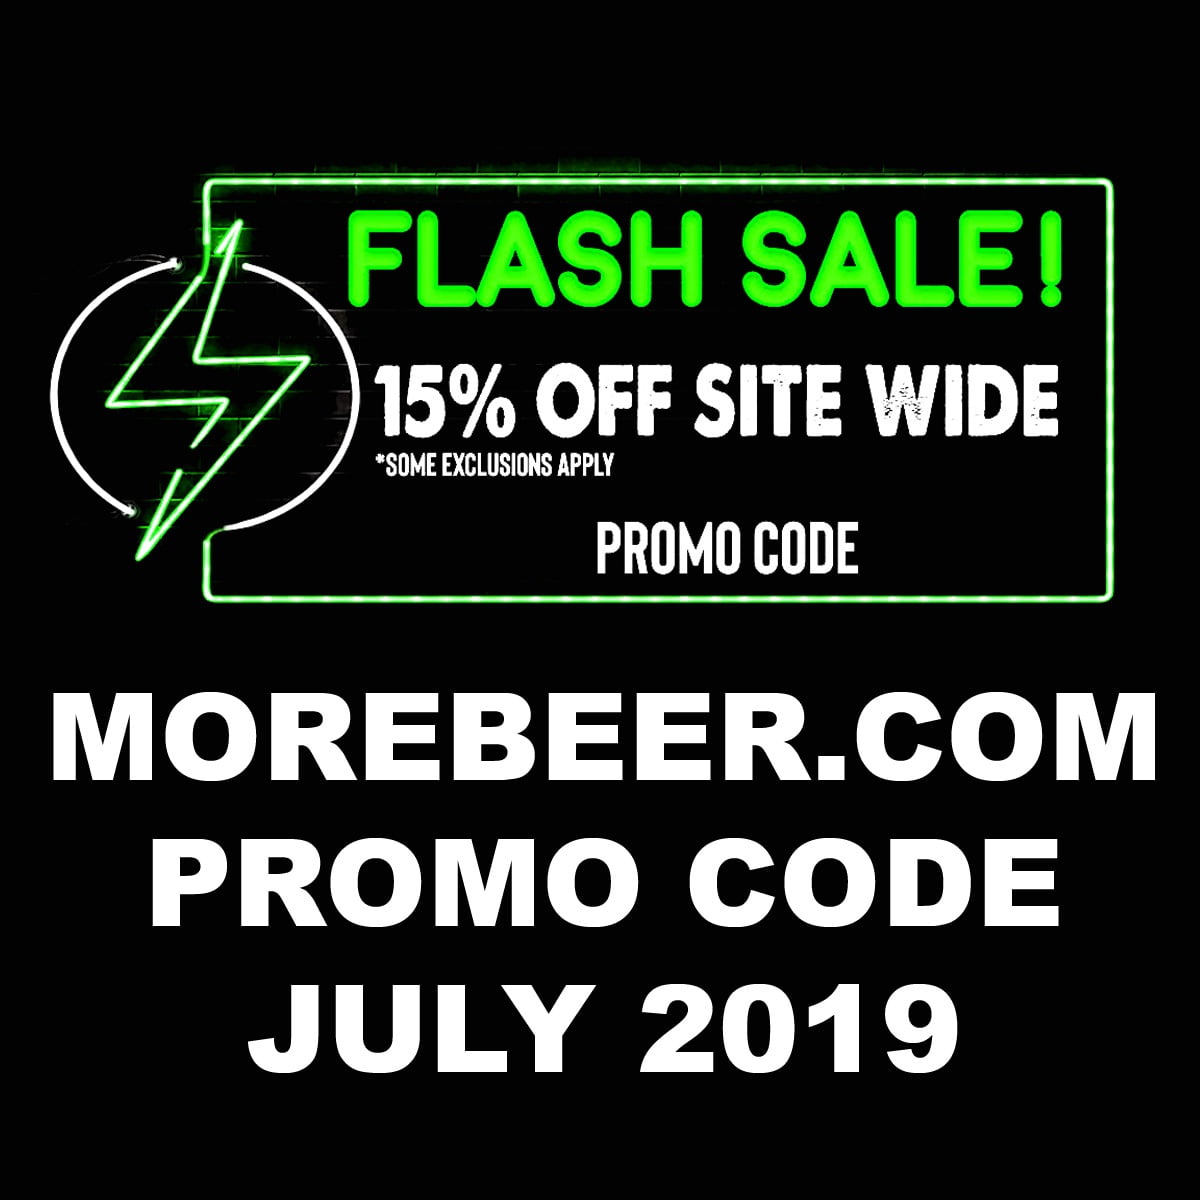 More Beer Flash Sale Promo Code Save 15%